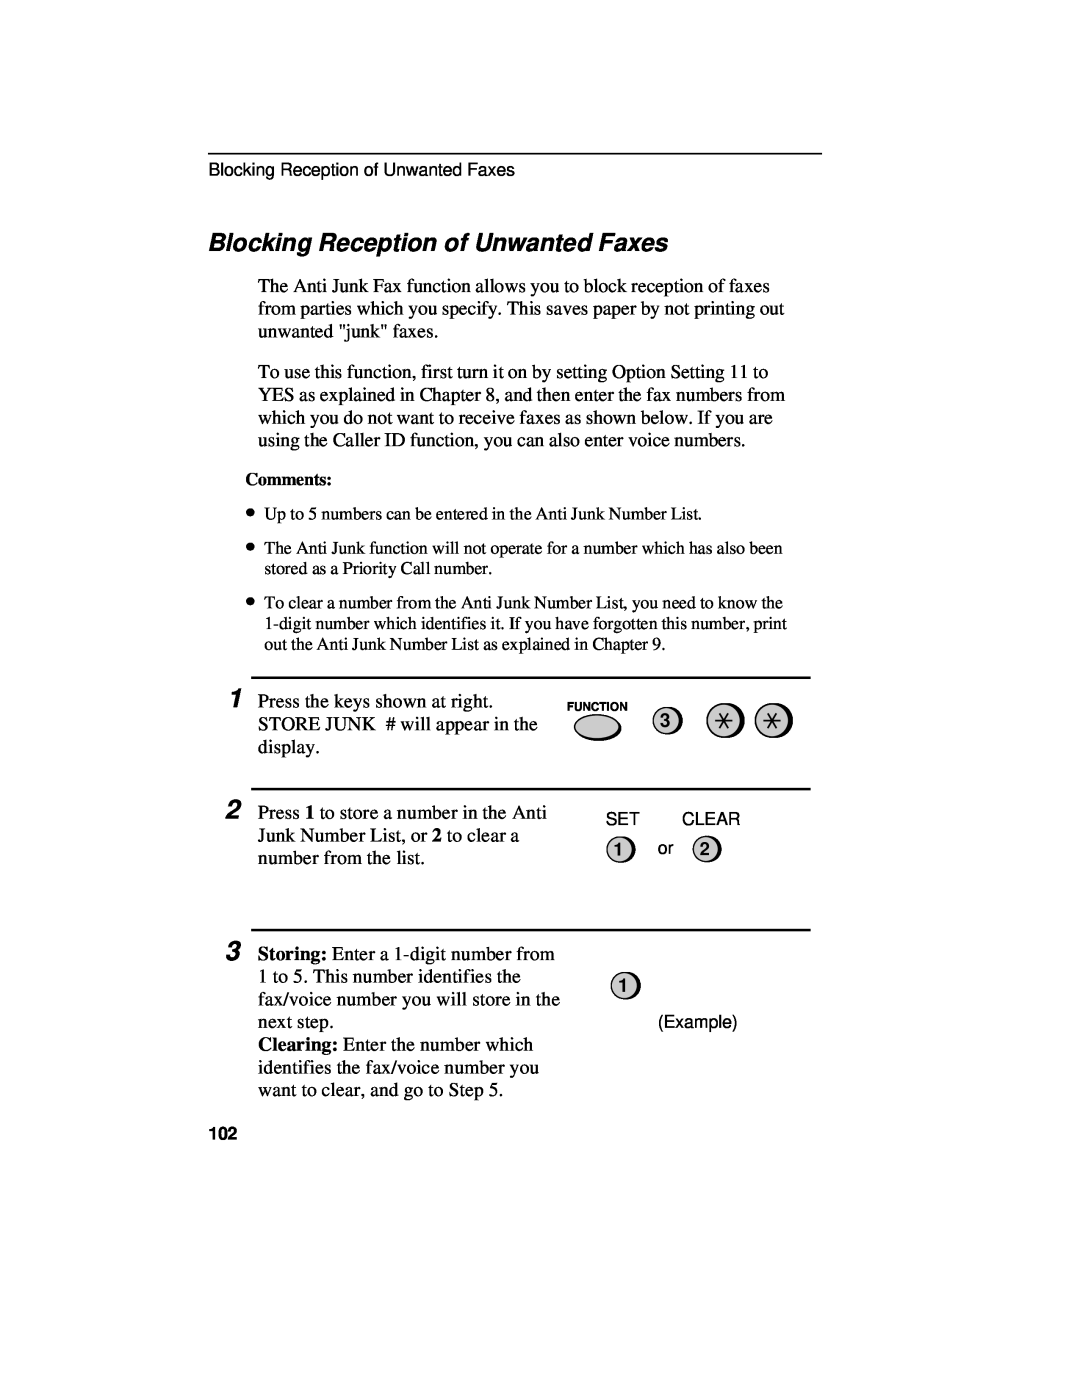 Sharp UX-460 operation manual Blocking Reception of Unwanted Faxes 